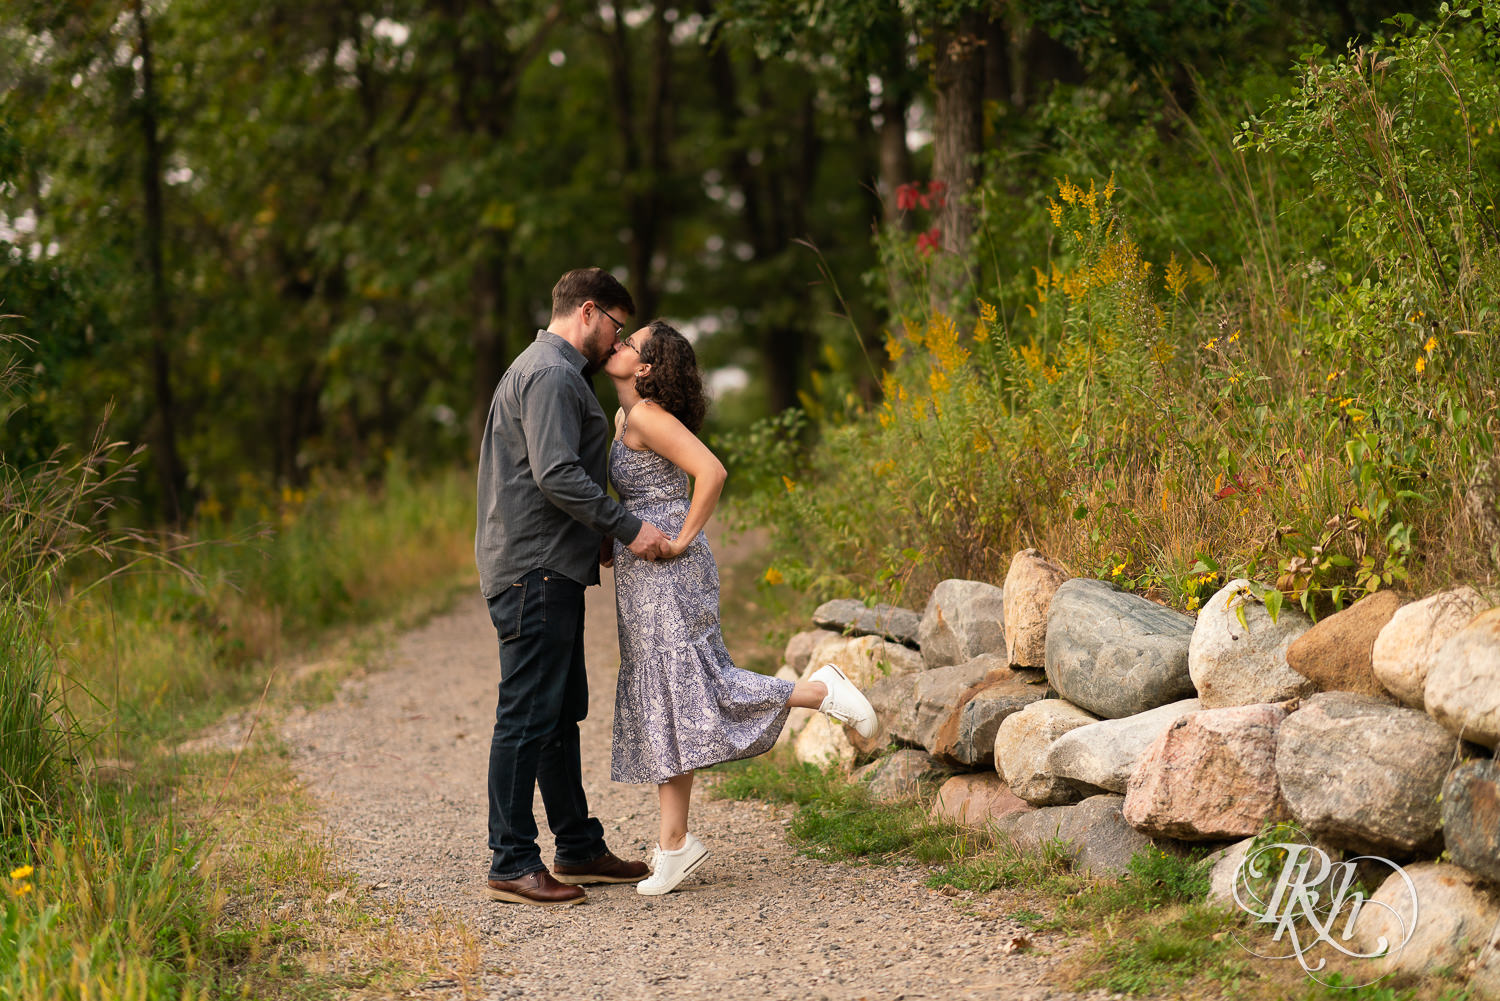 Man and woman in glasses kissing at sunset engagement session in Eagan, Minnesota.